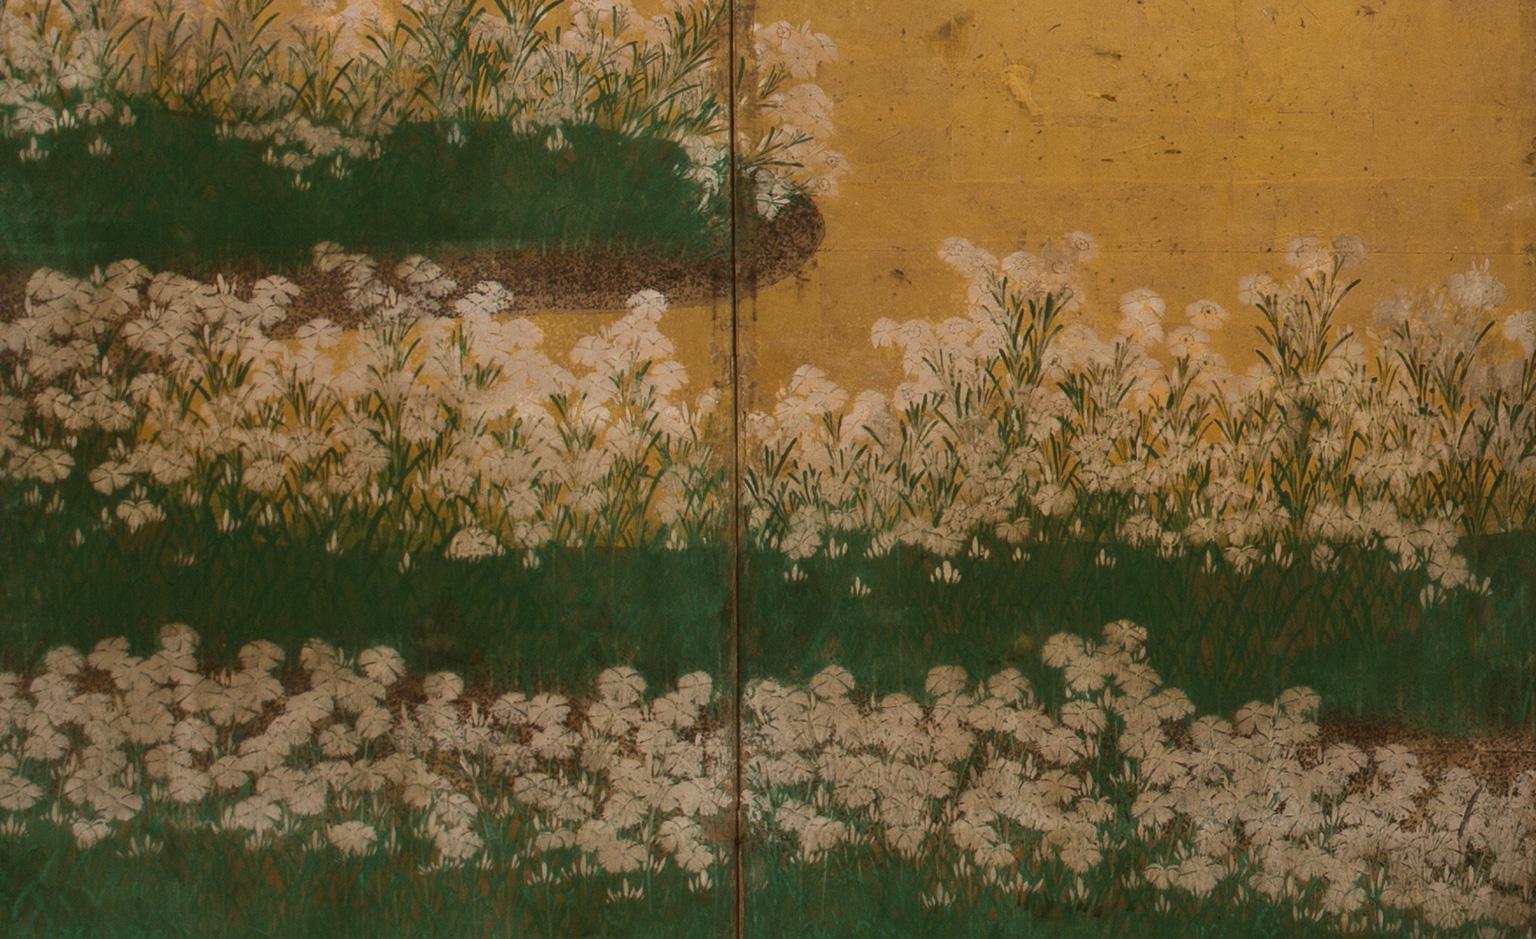 A field of wild pinks (nadeshiko; Dianthus superbus) blooms under a rising moon in this six-panel folding screen. The anonymous artist arranged the flowers, a relative of the carnation, in dense, rhythmical clusters in three horizontal registers in